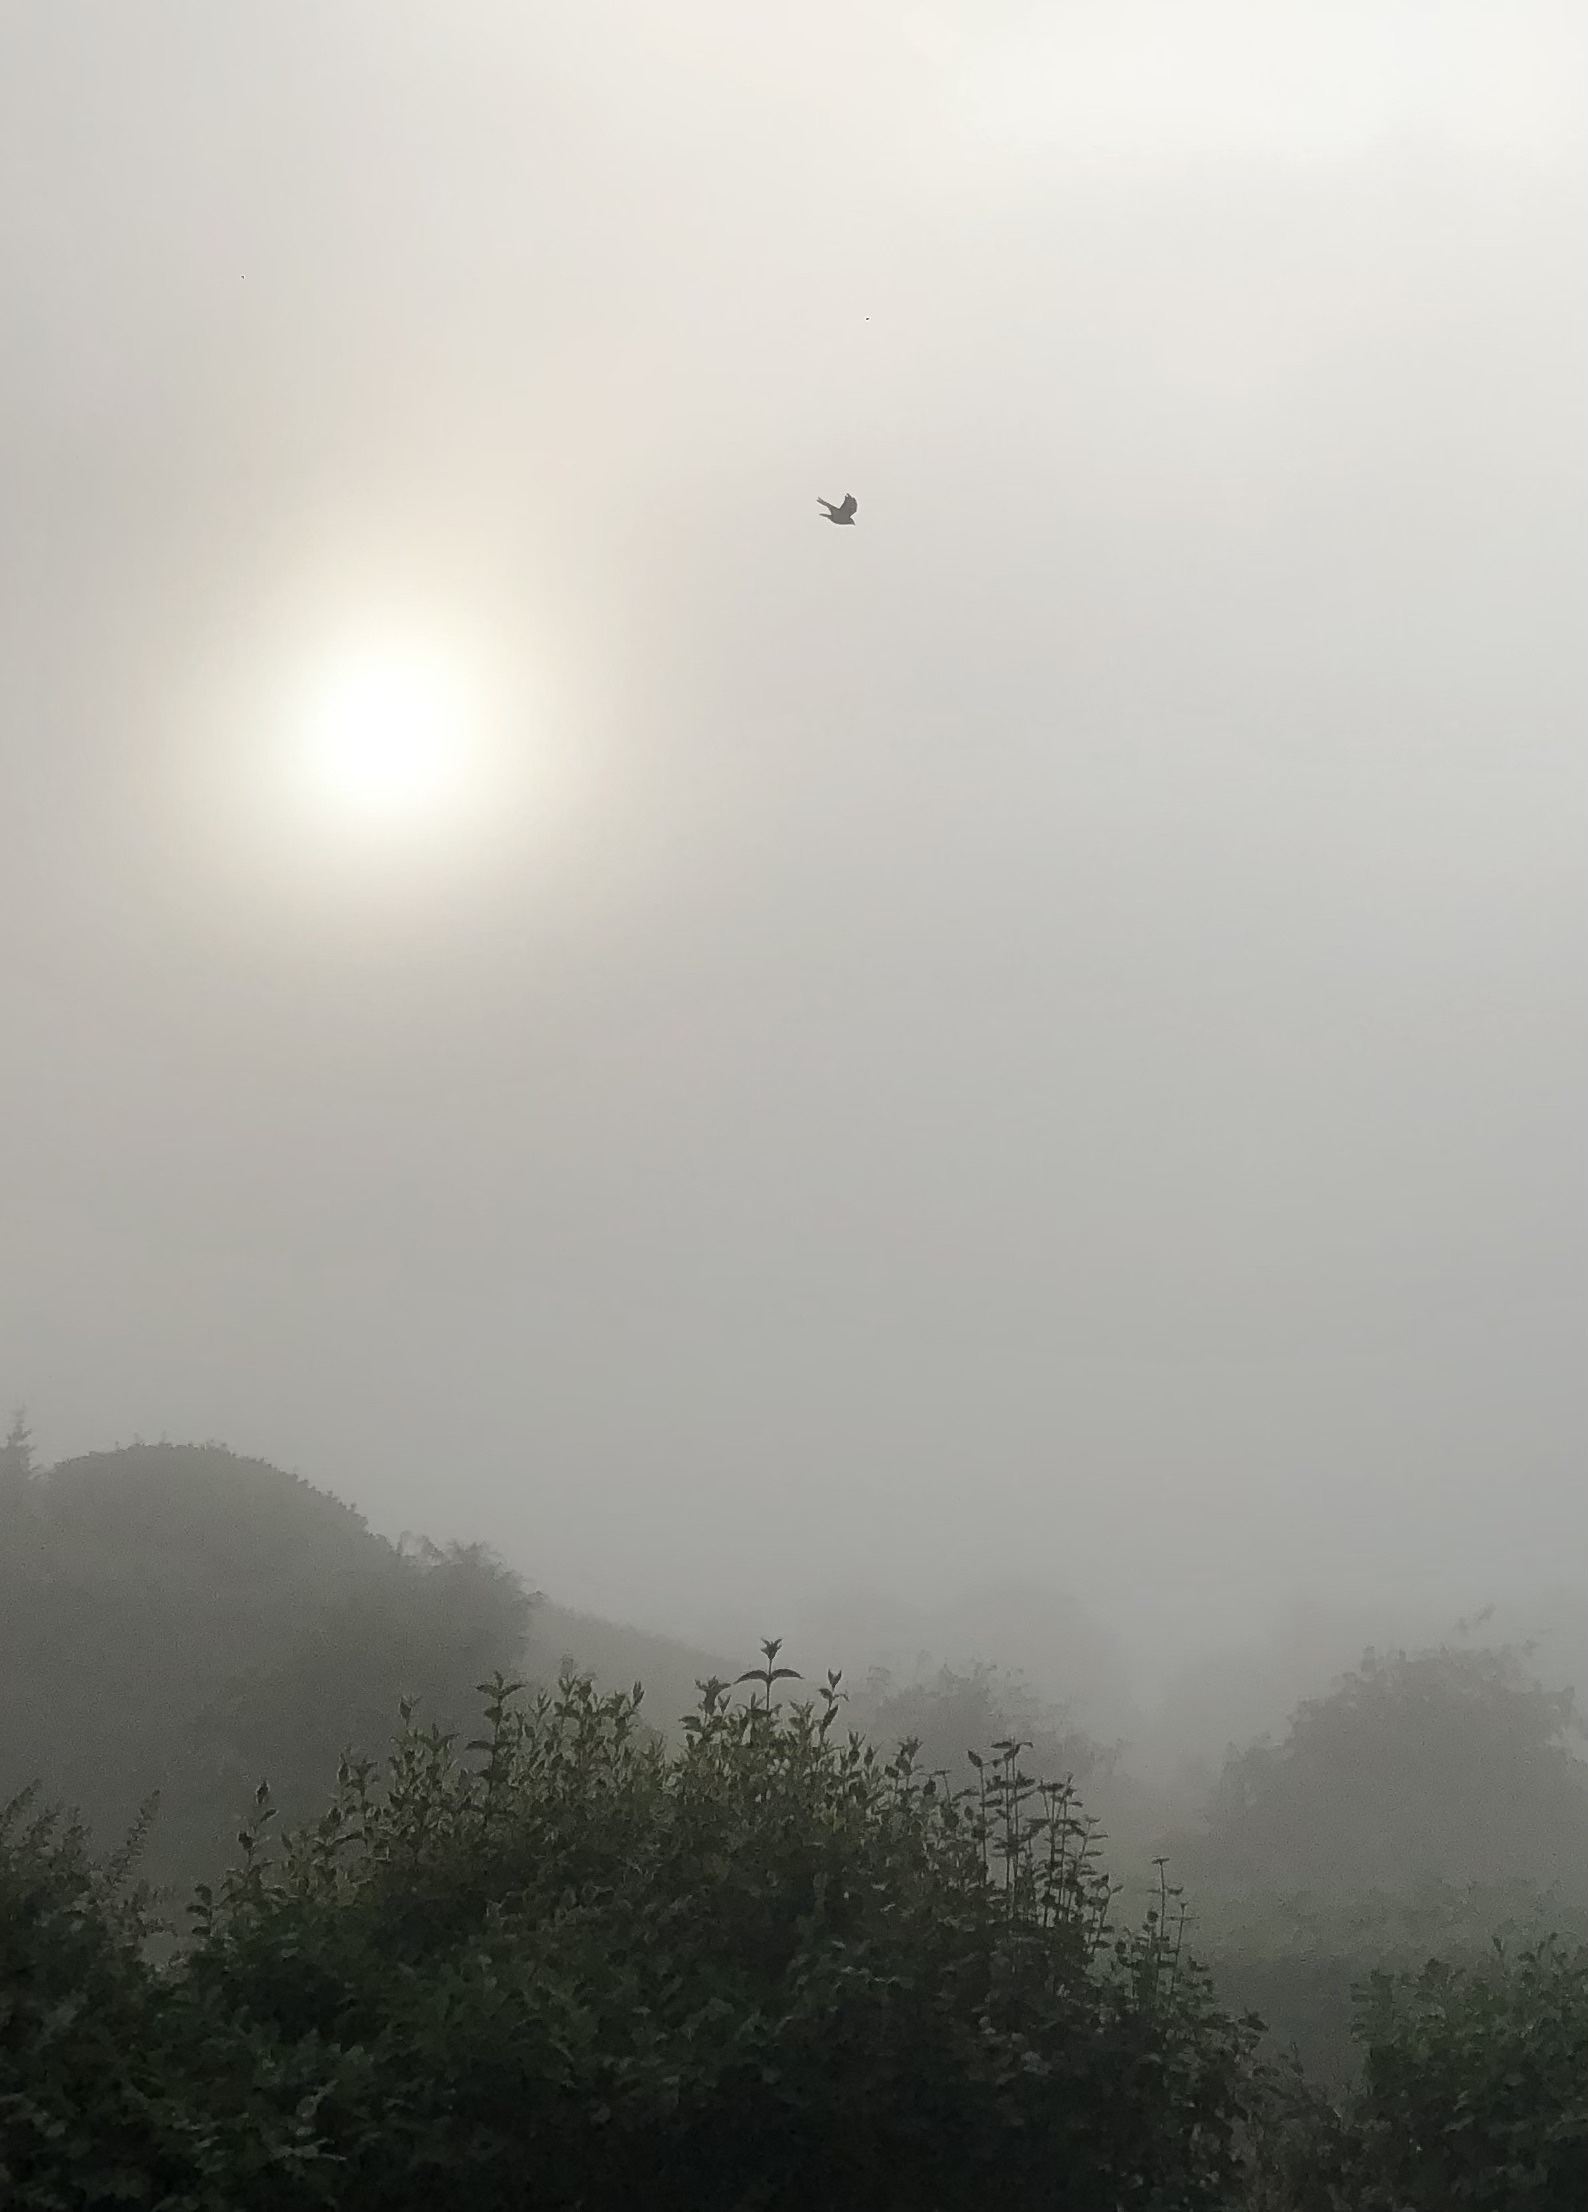 Jackdaw flying over the countryside. It’s misty with the sun breaking through in the background